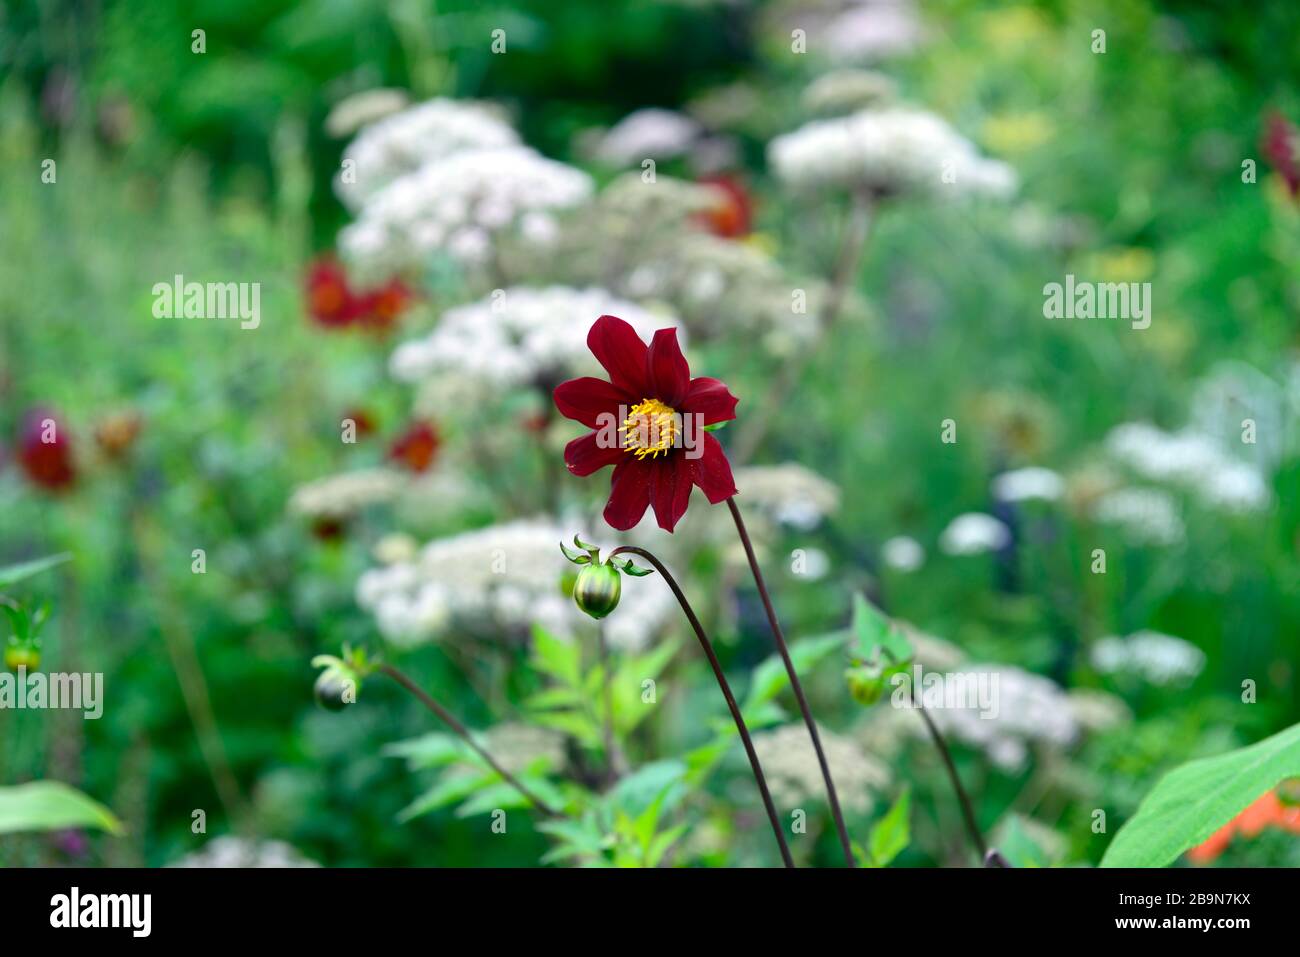 Dahlia seedling,red,scarlet coloured, flower,flowers,flowering,Selinum wallichianum,umbellifer,mixed planting combination,ecletic mix,mix,mixed,tropic Stock Photo